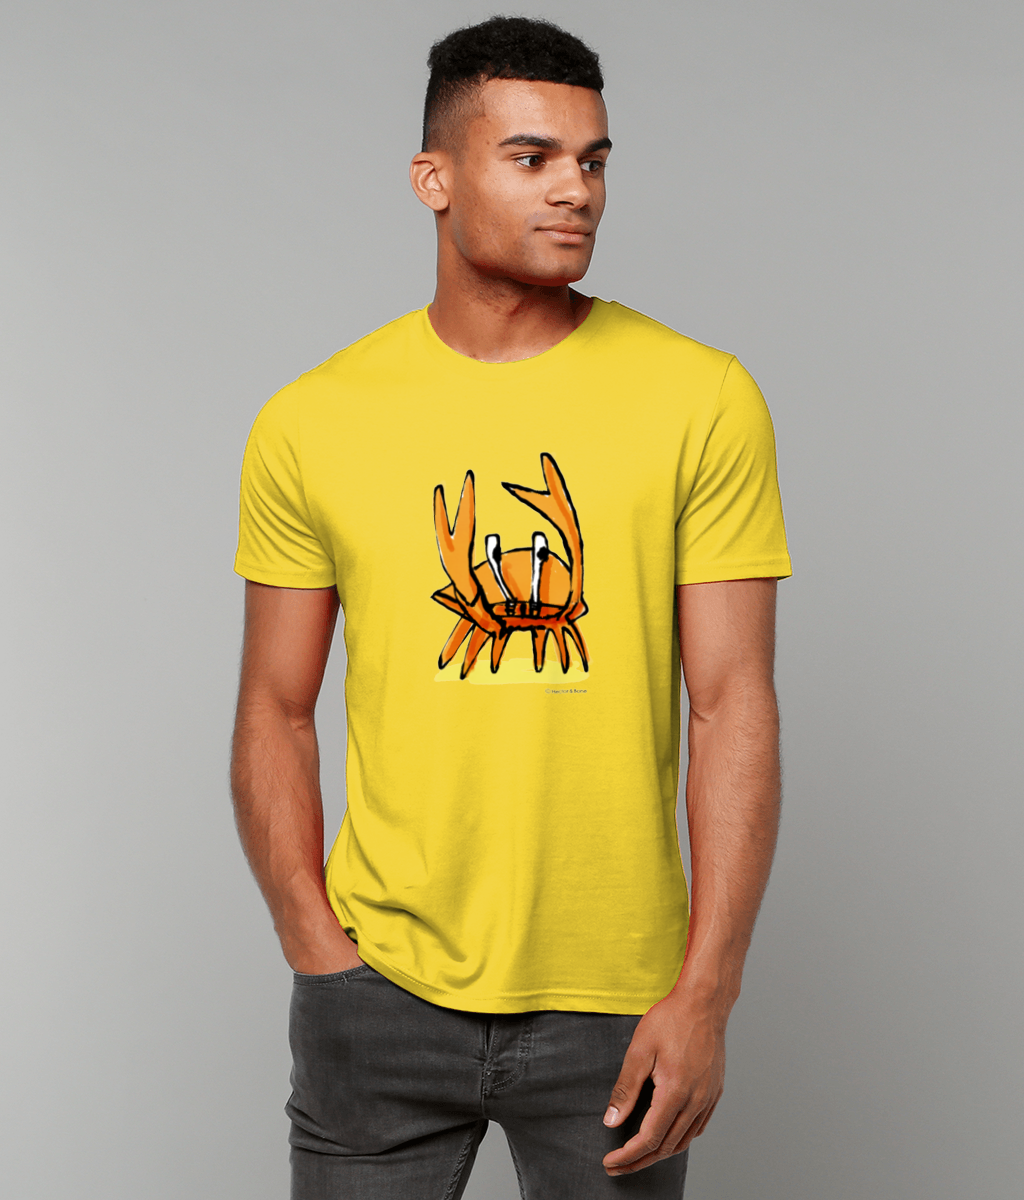 Crab T-shirt - Young man wearing an illustrated funny Angry Crab t-shirt design on a yellow colour vegan cotton t-shirts by Hector and Bone